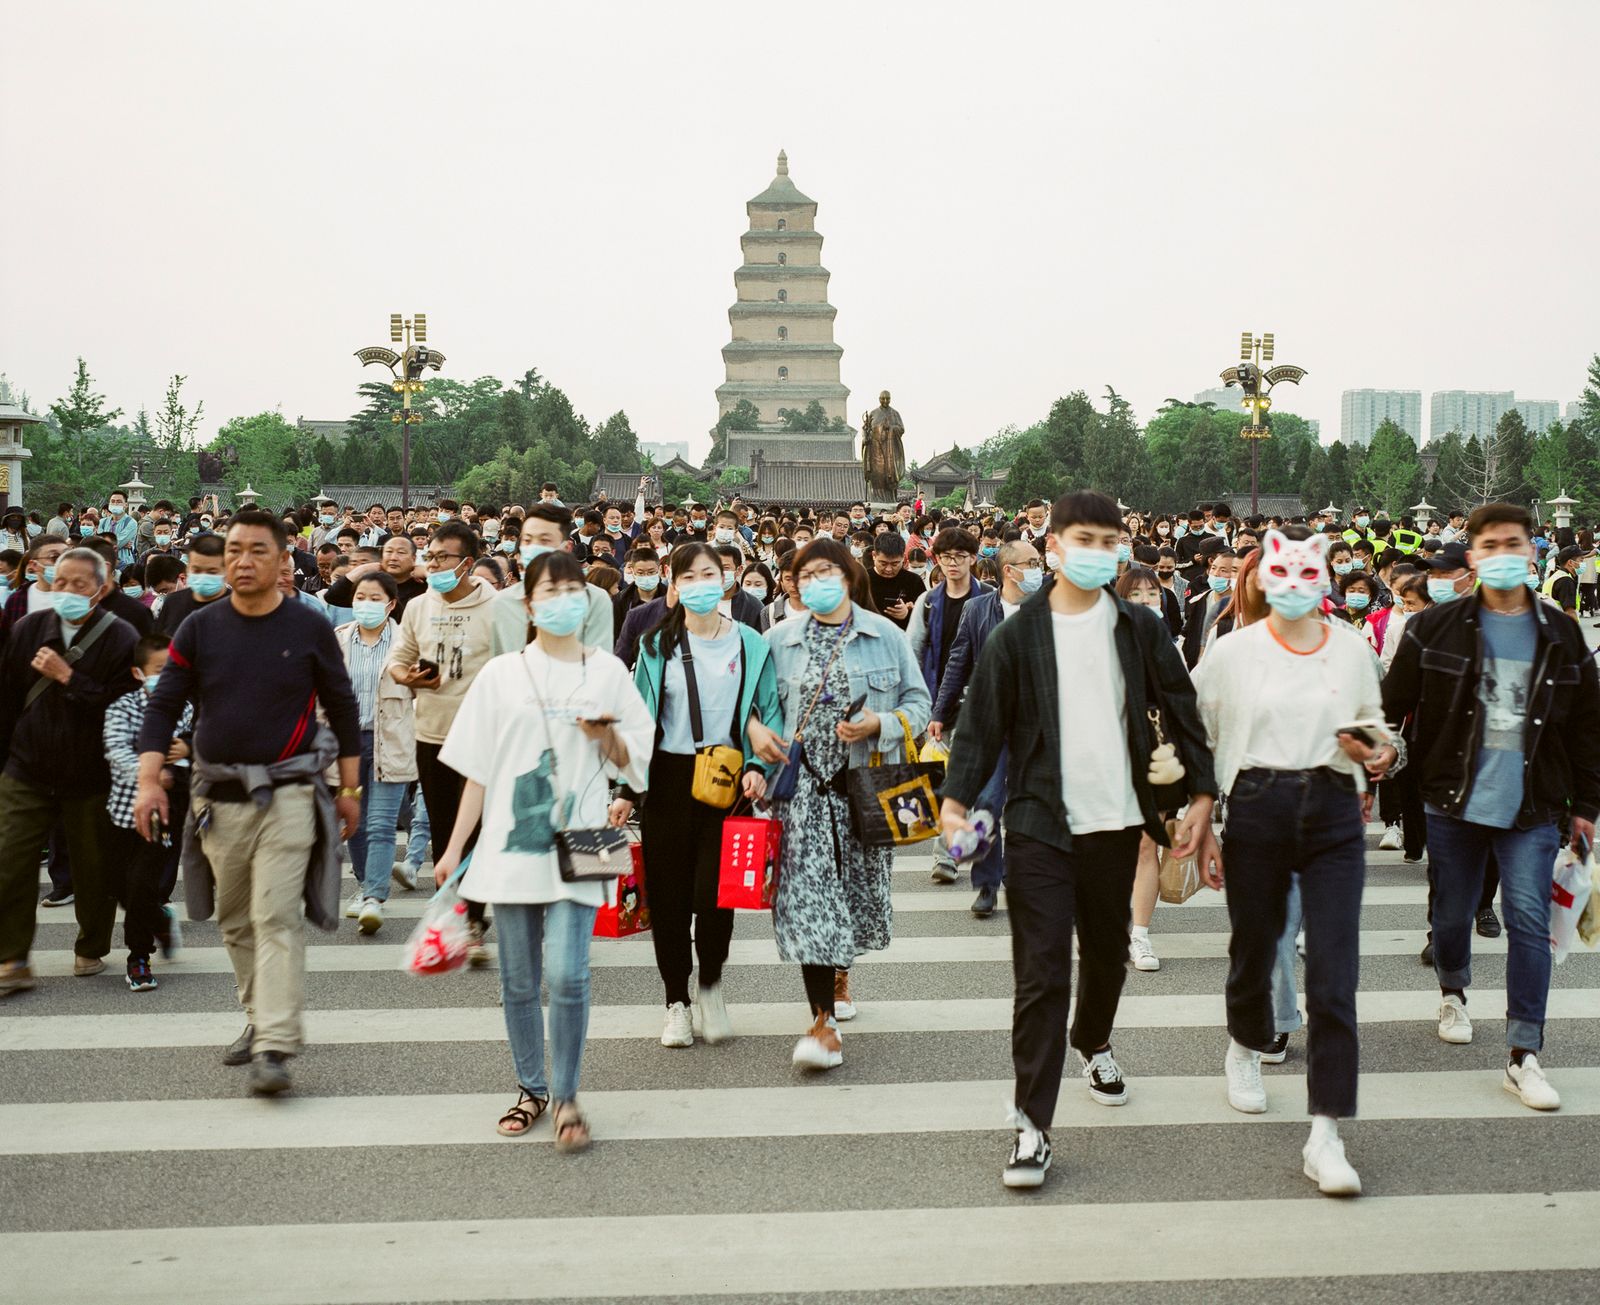 © Pan Wang - Tourists in the wild goose pagoda Scenic Area